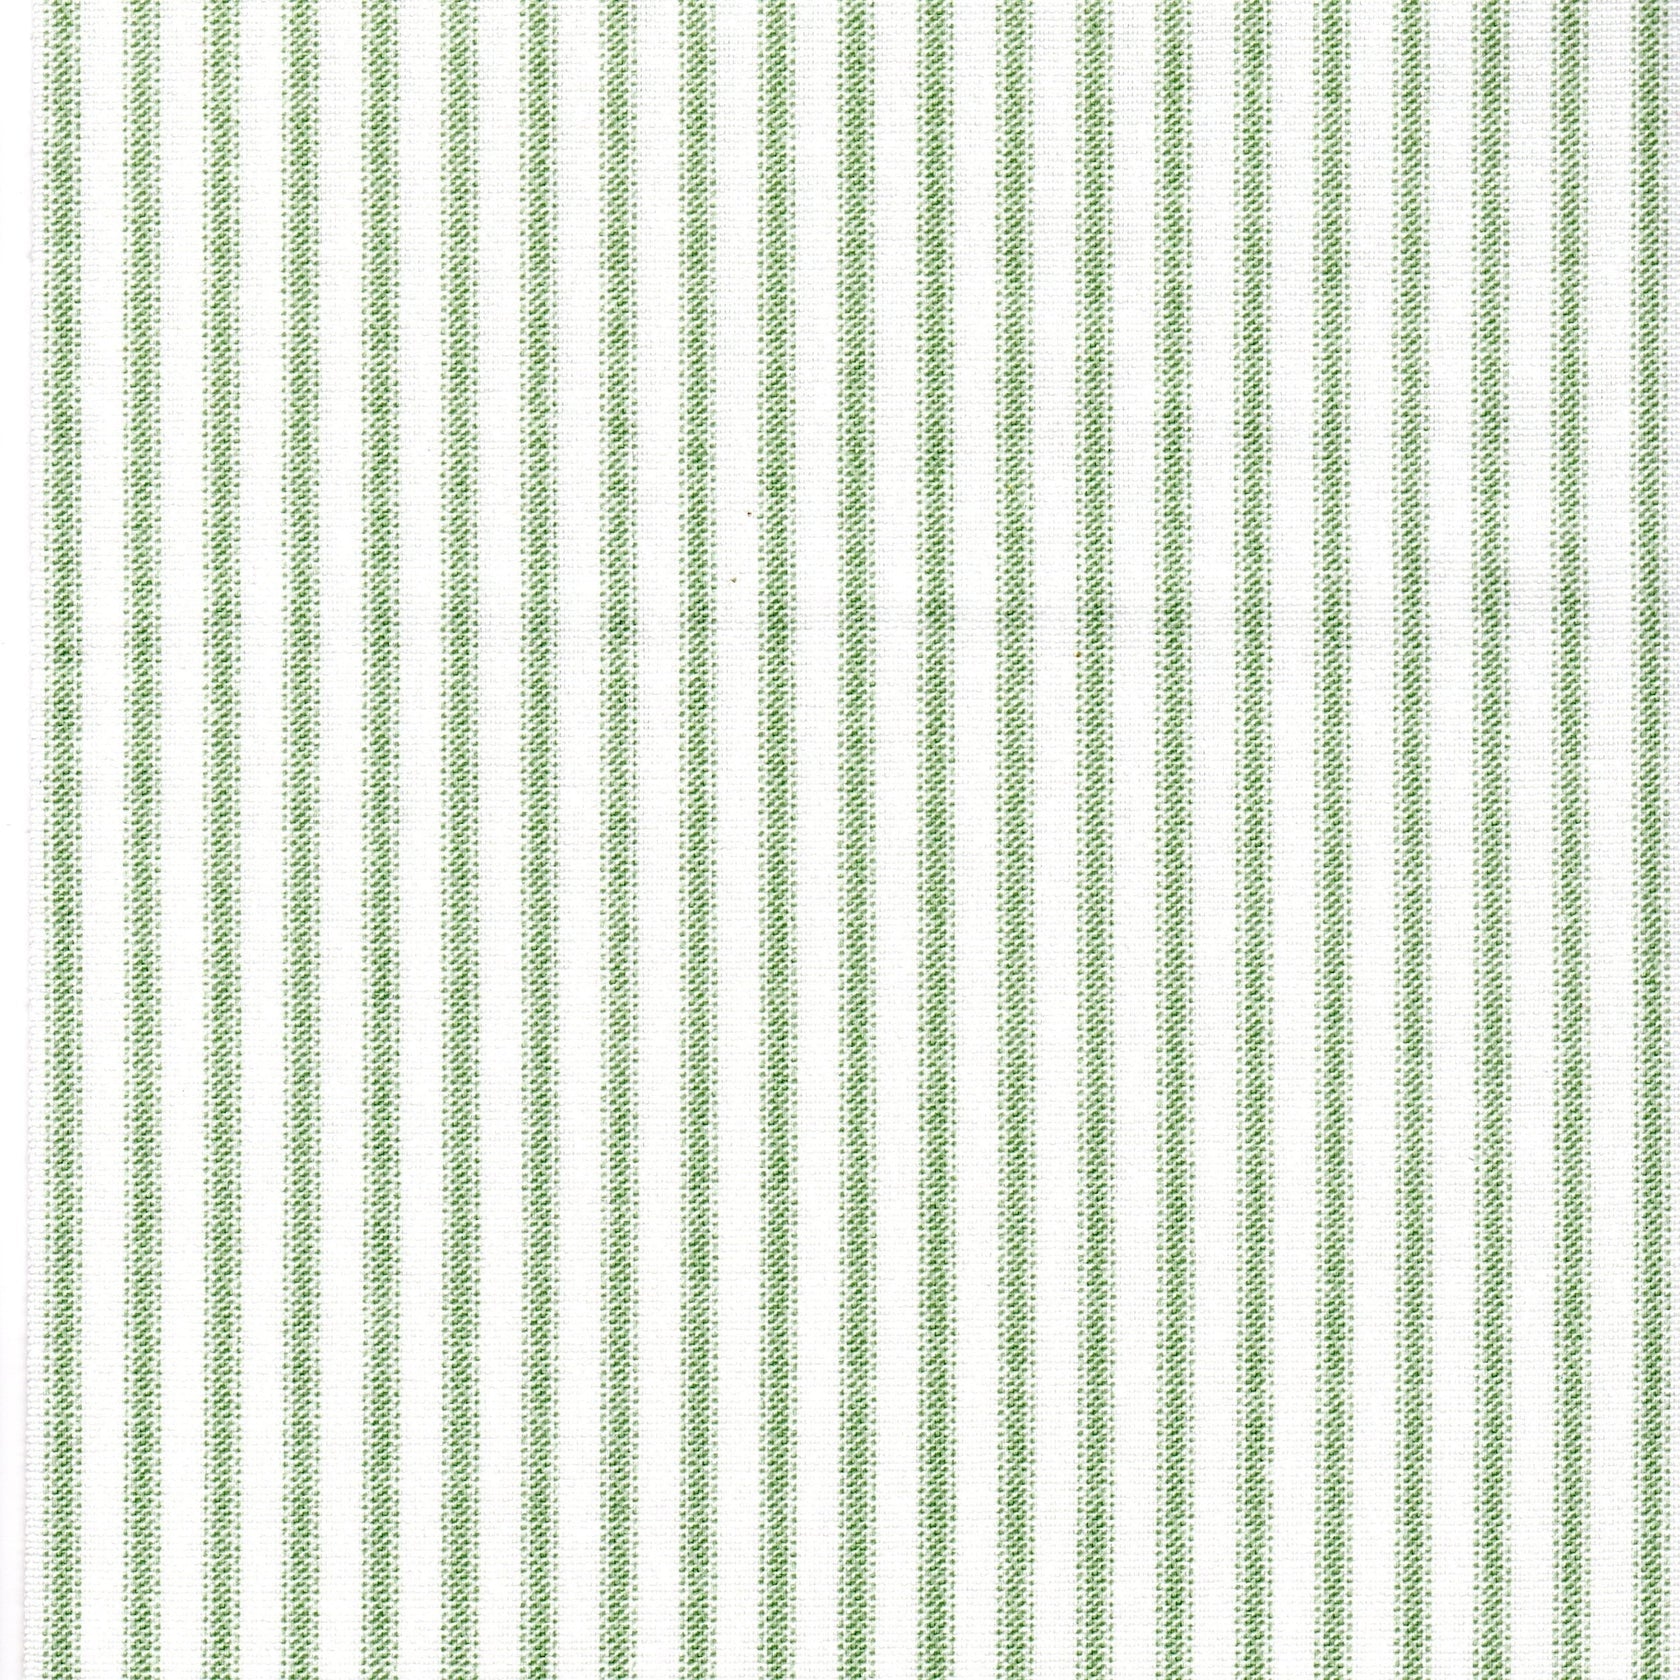 round tablecloth in Classic Sage Green Ticking Stripe on White